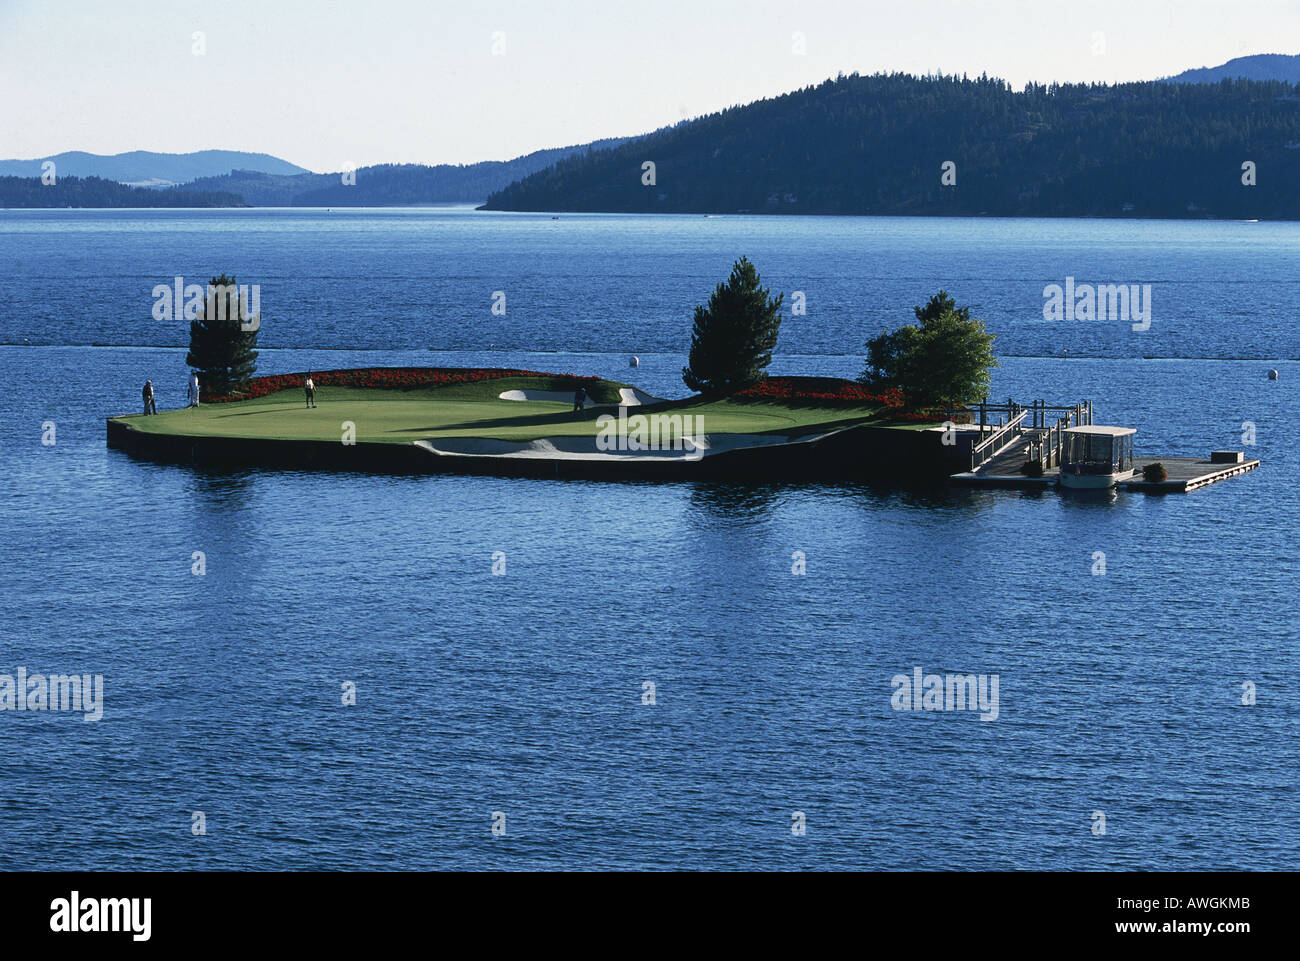 USA, Idaho, Couer d'Alene Resort, unique floating golf green on 14th hole located on Lake Couer d'Alene Stock Photo